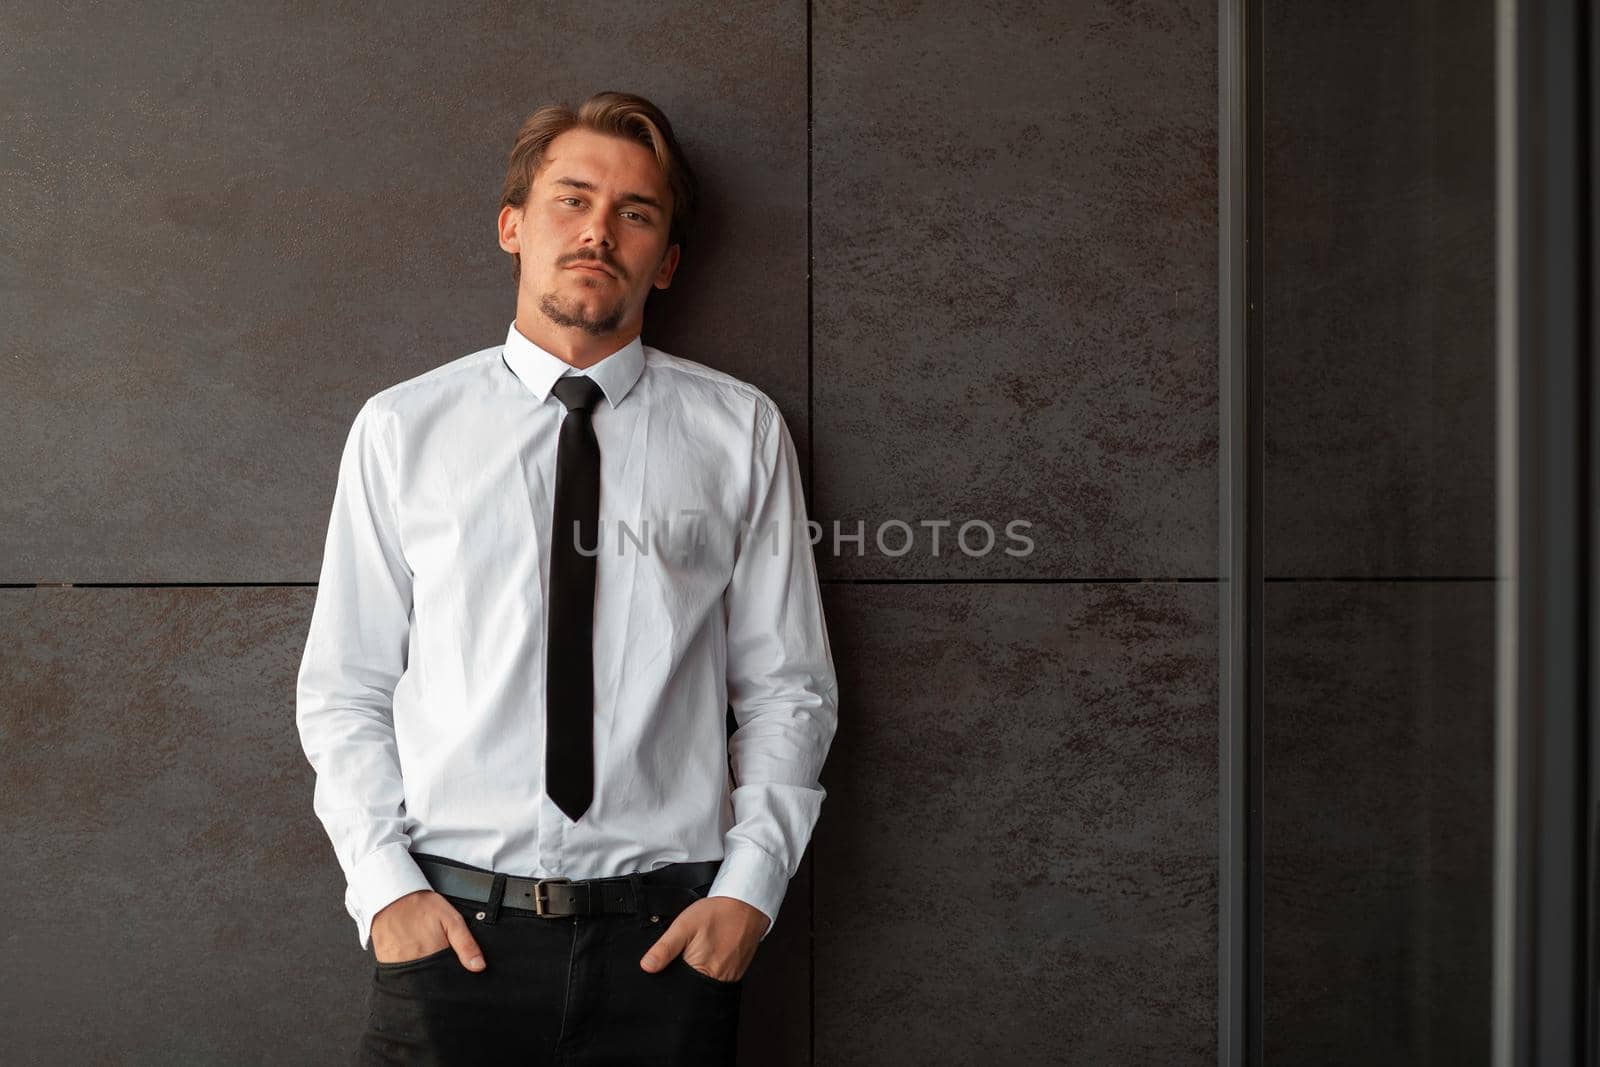 Startup businessman in a white shirt with a black tie using smartphone while standing in front of gray wall during a break from work outside. High-quality photo